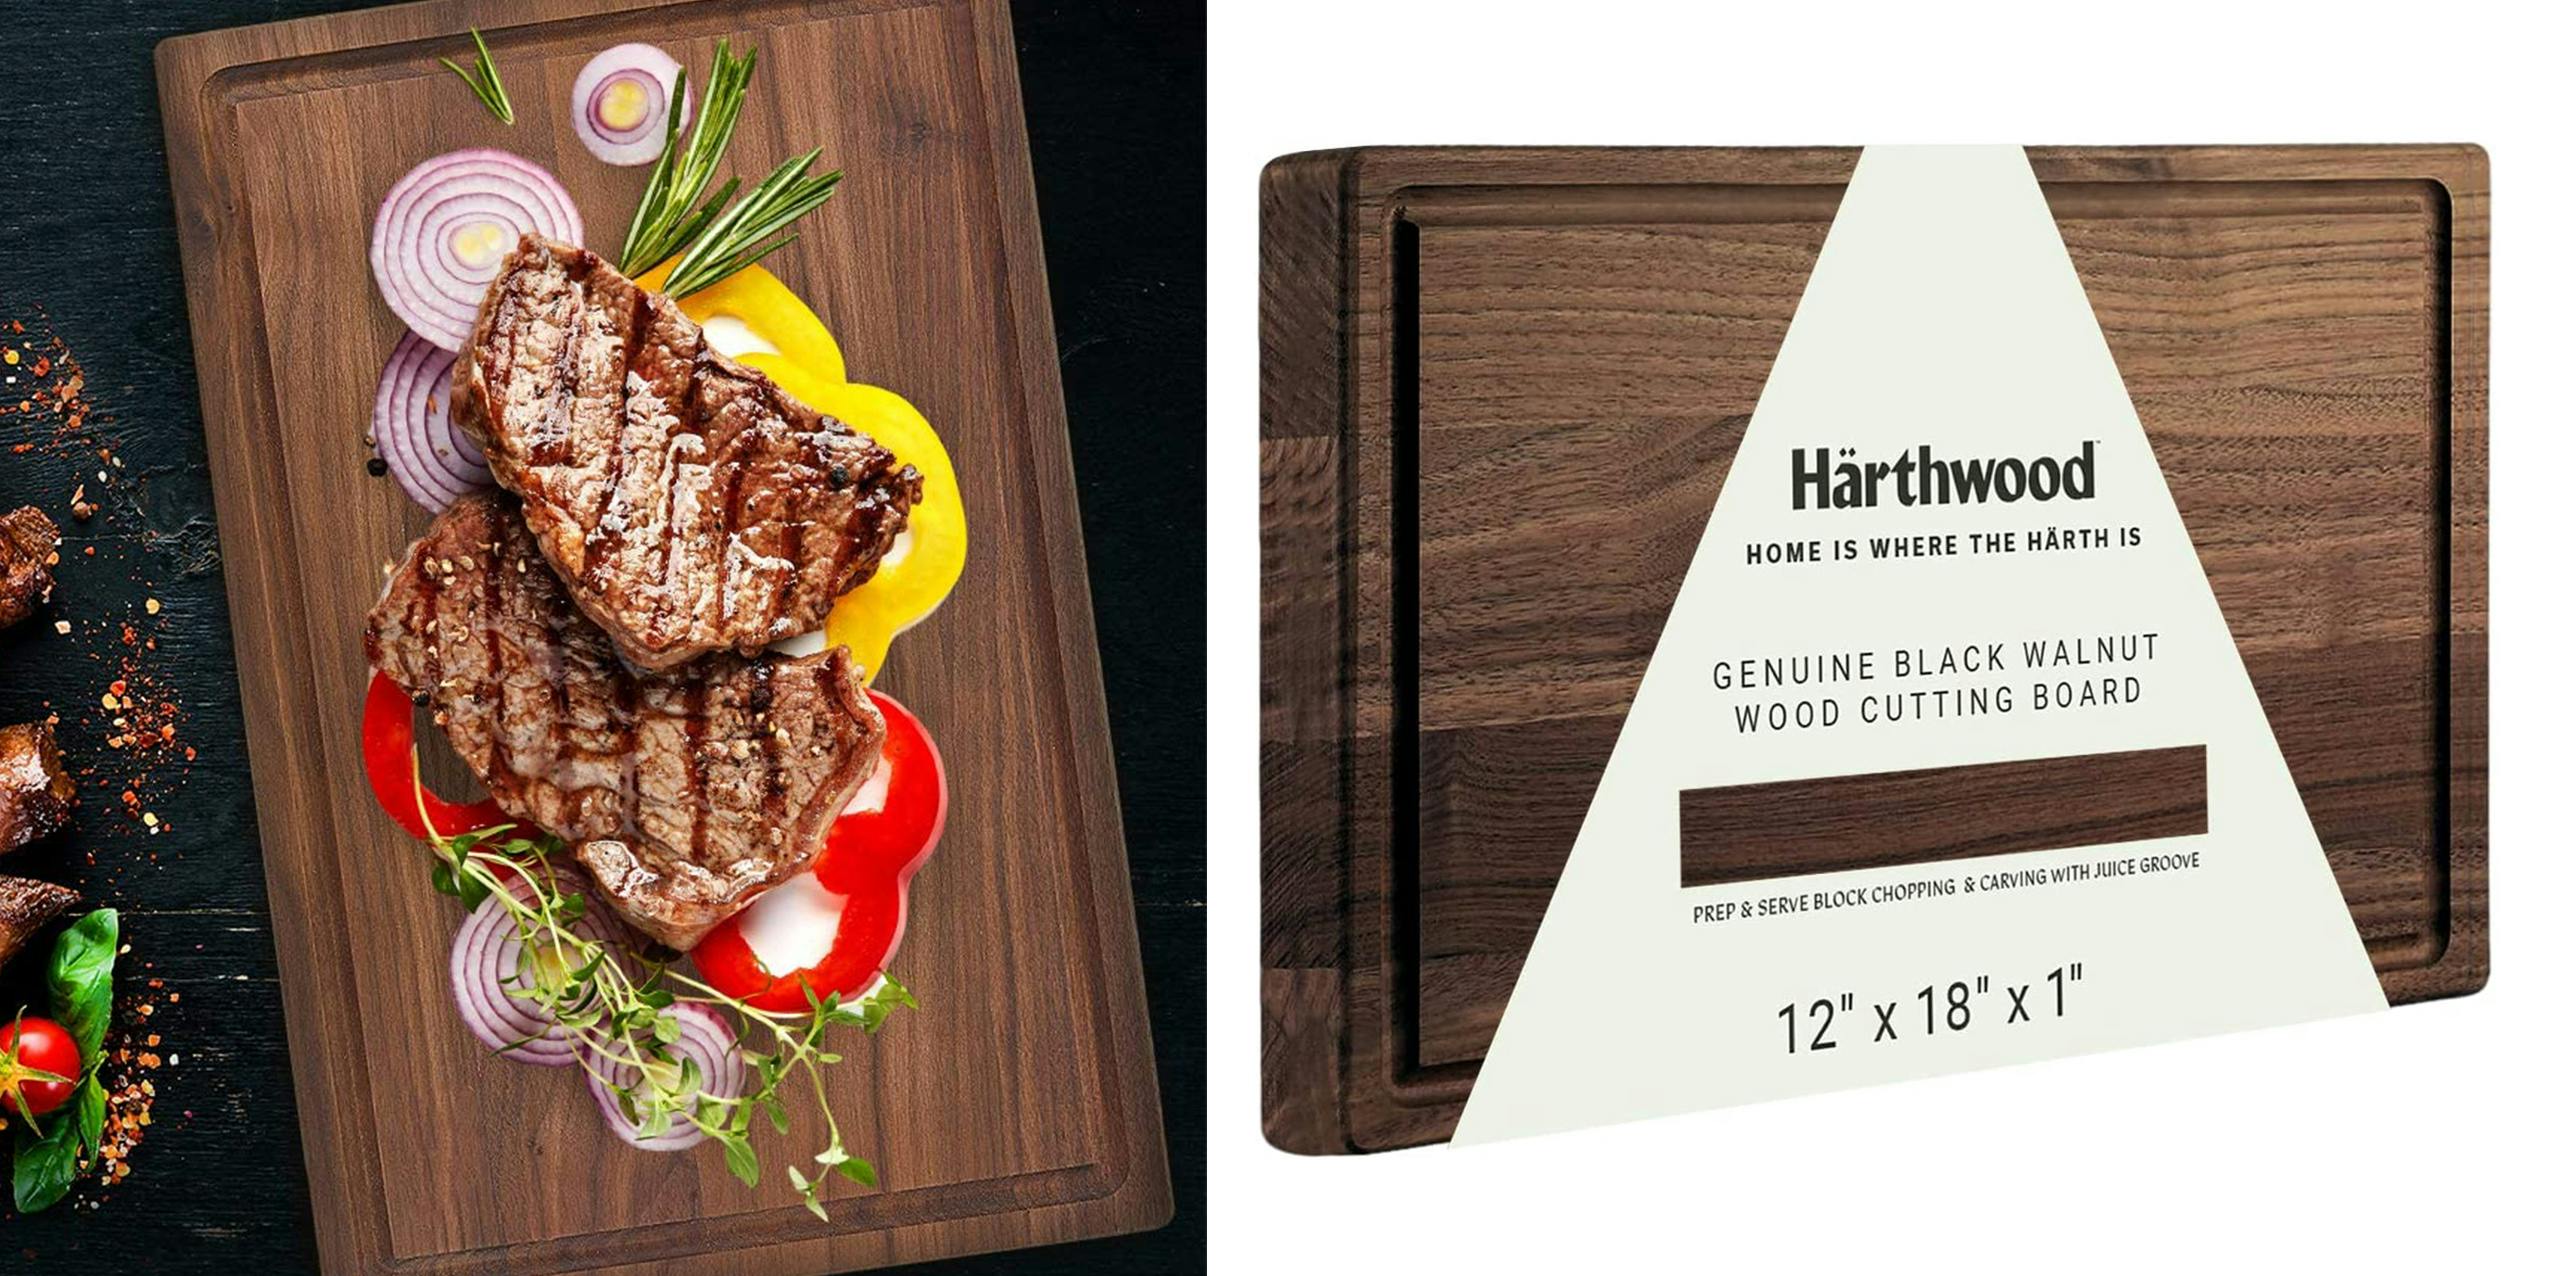 Härthwood Walnut cutting board with meat and vegetables presented on it.